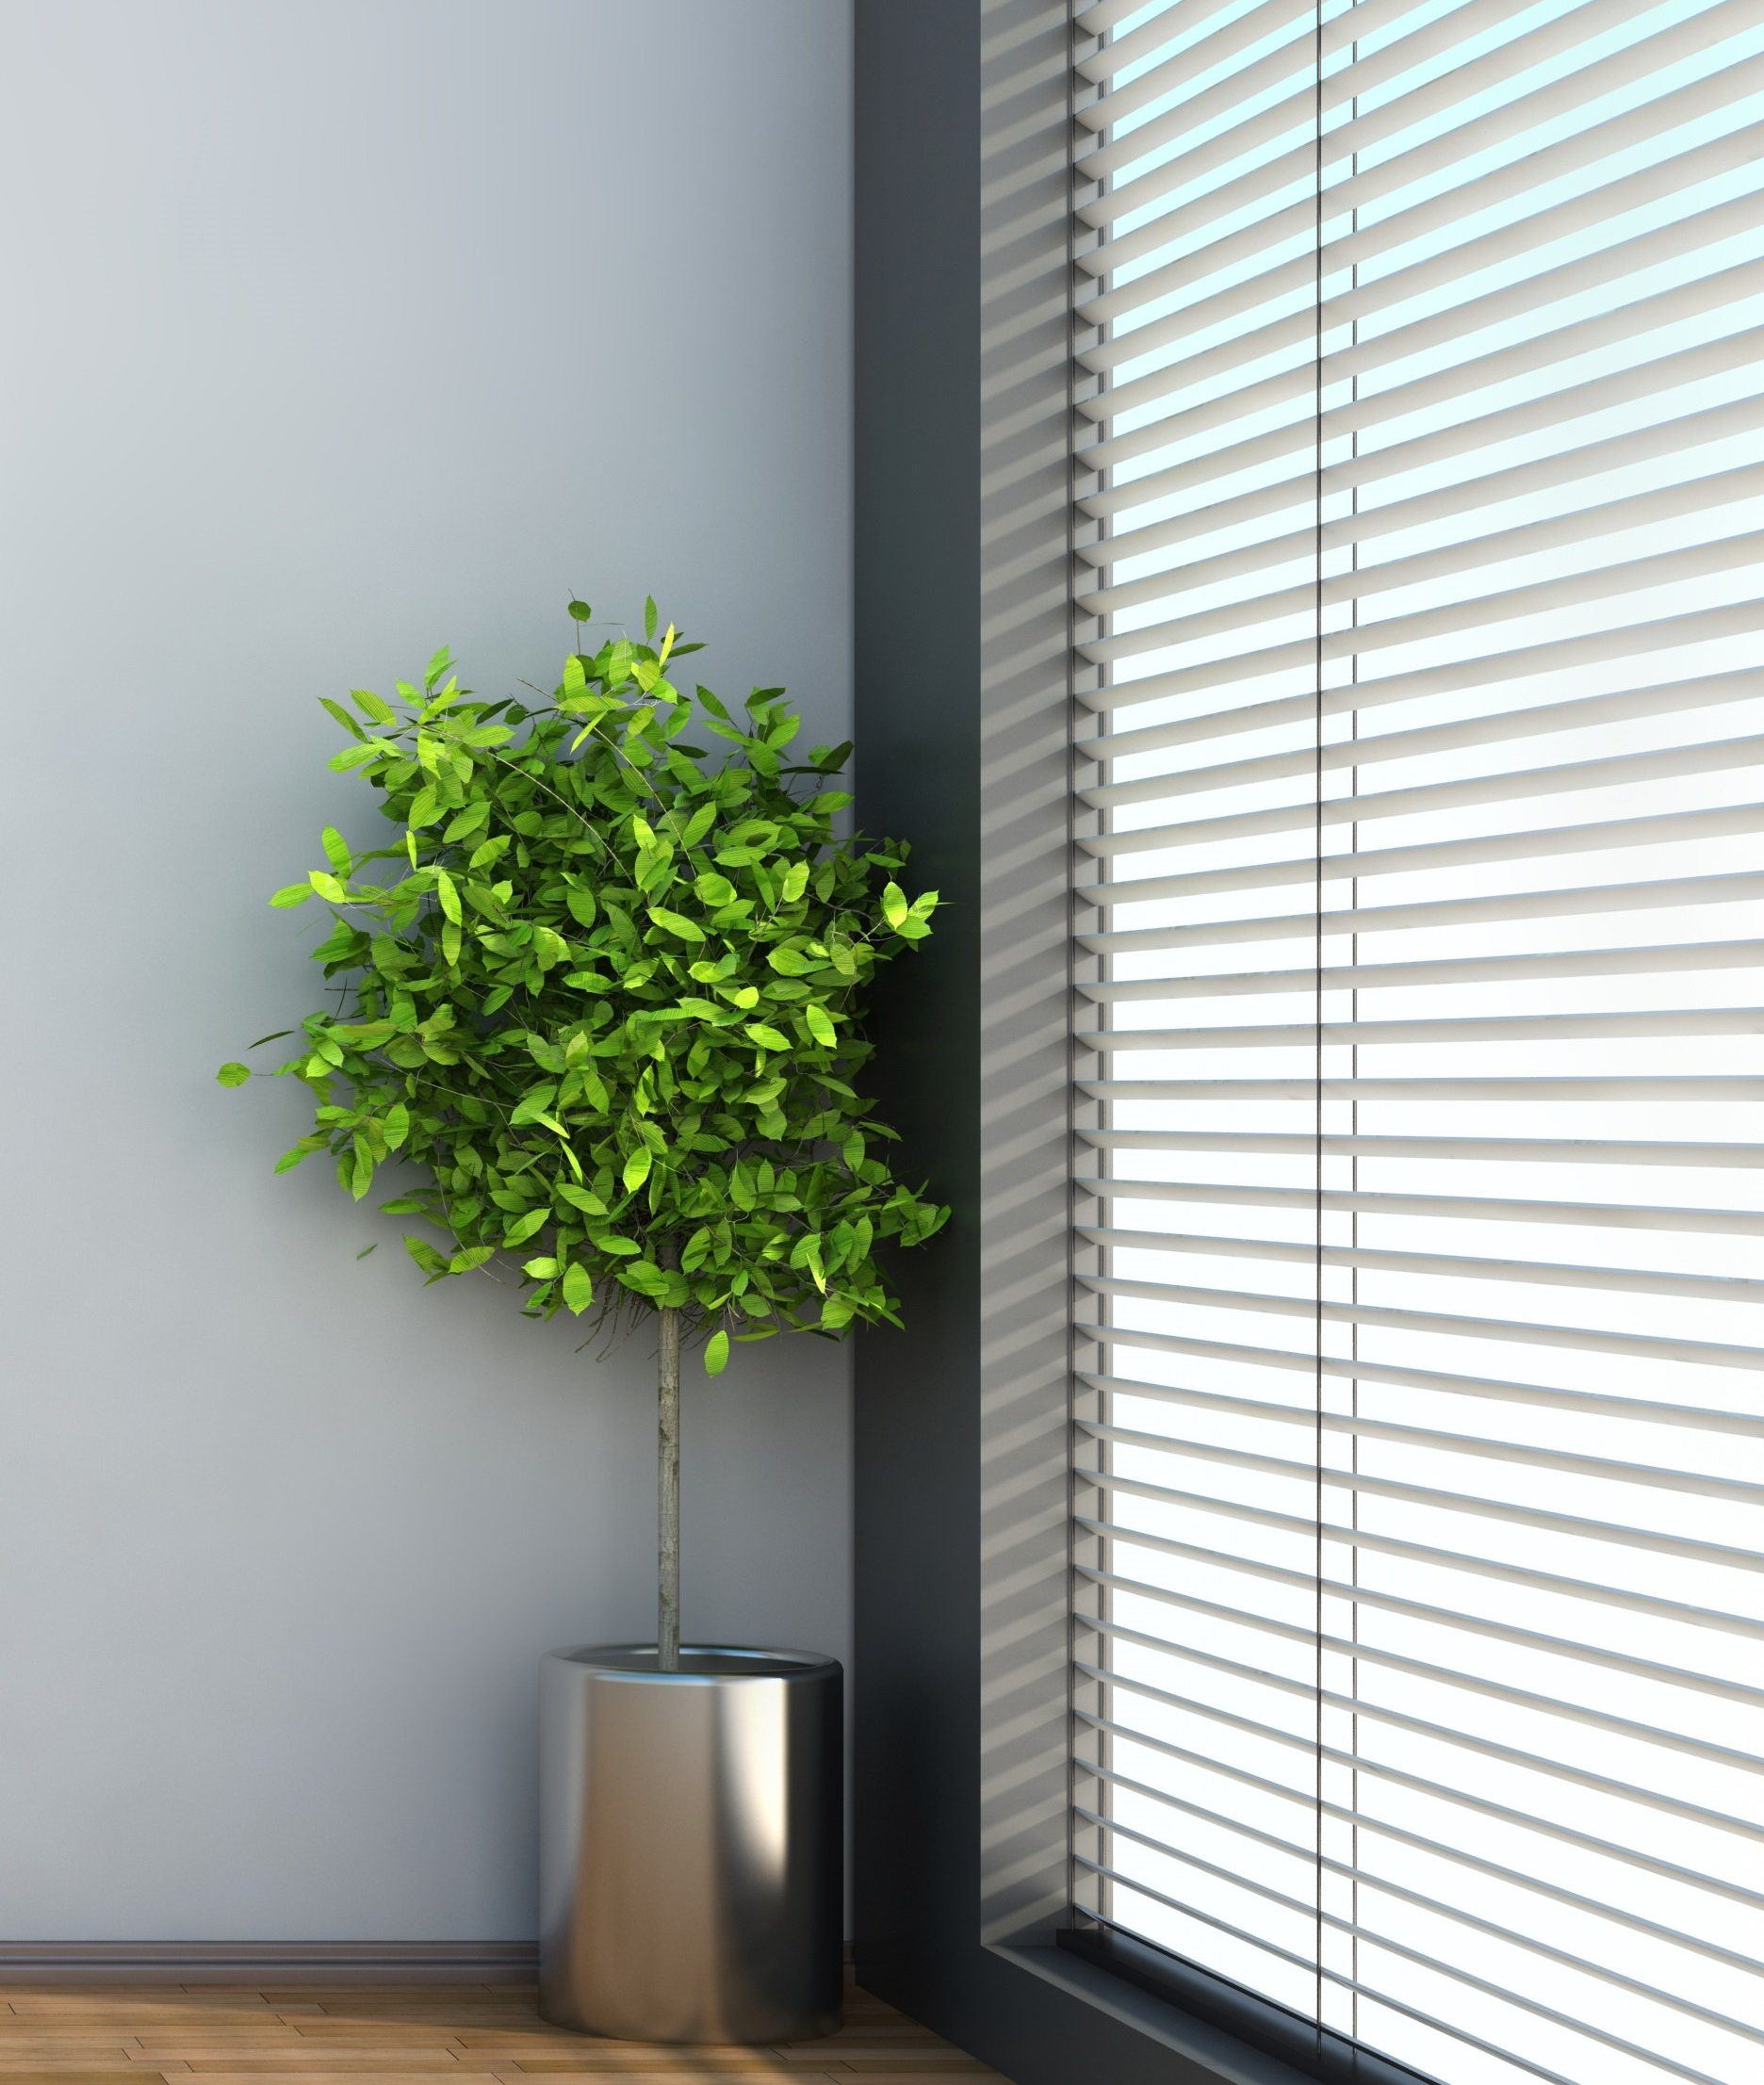 Bright green shrub in chrome pot, beside open venetian blinds letting sun into grey room with timber floor.